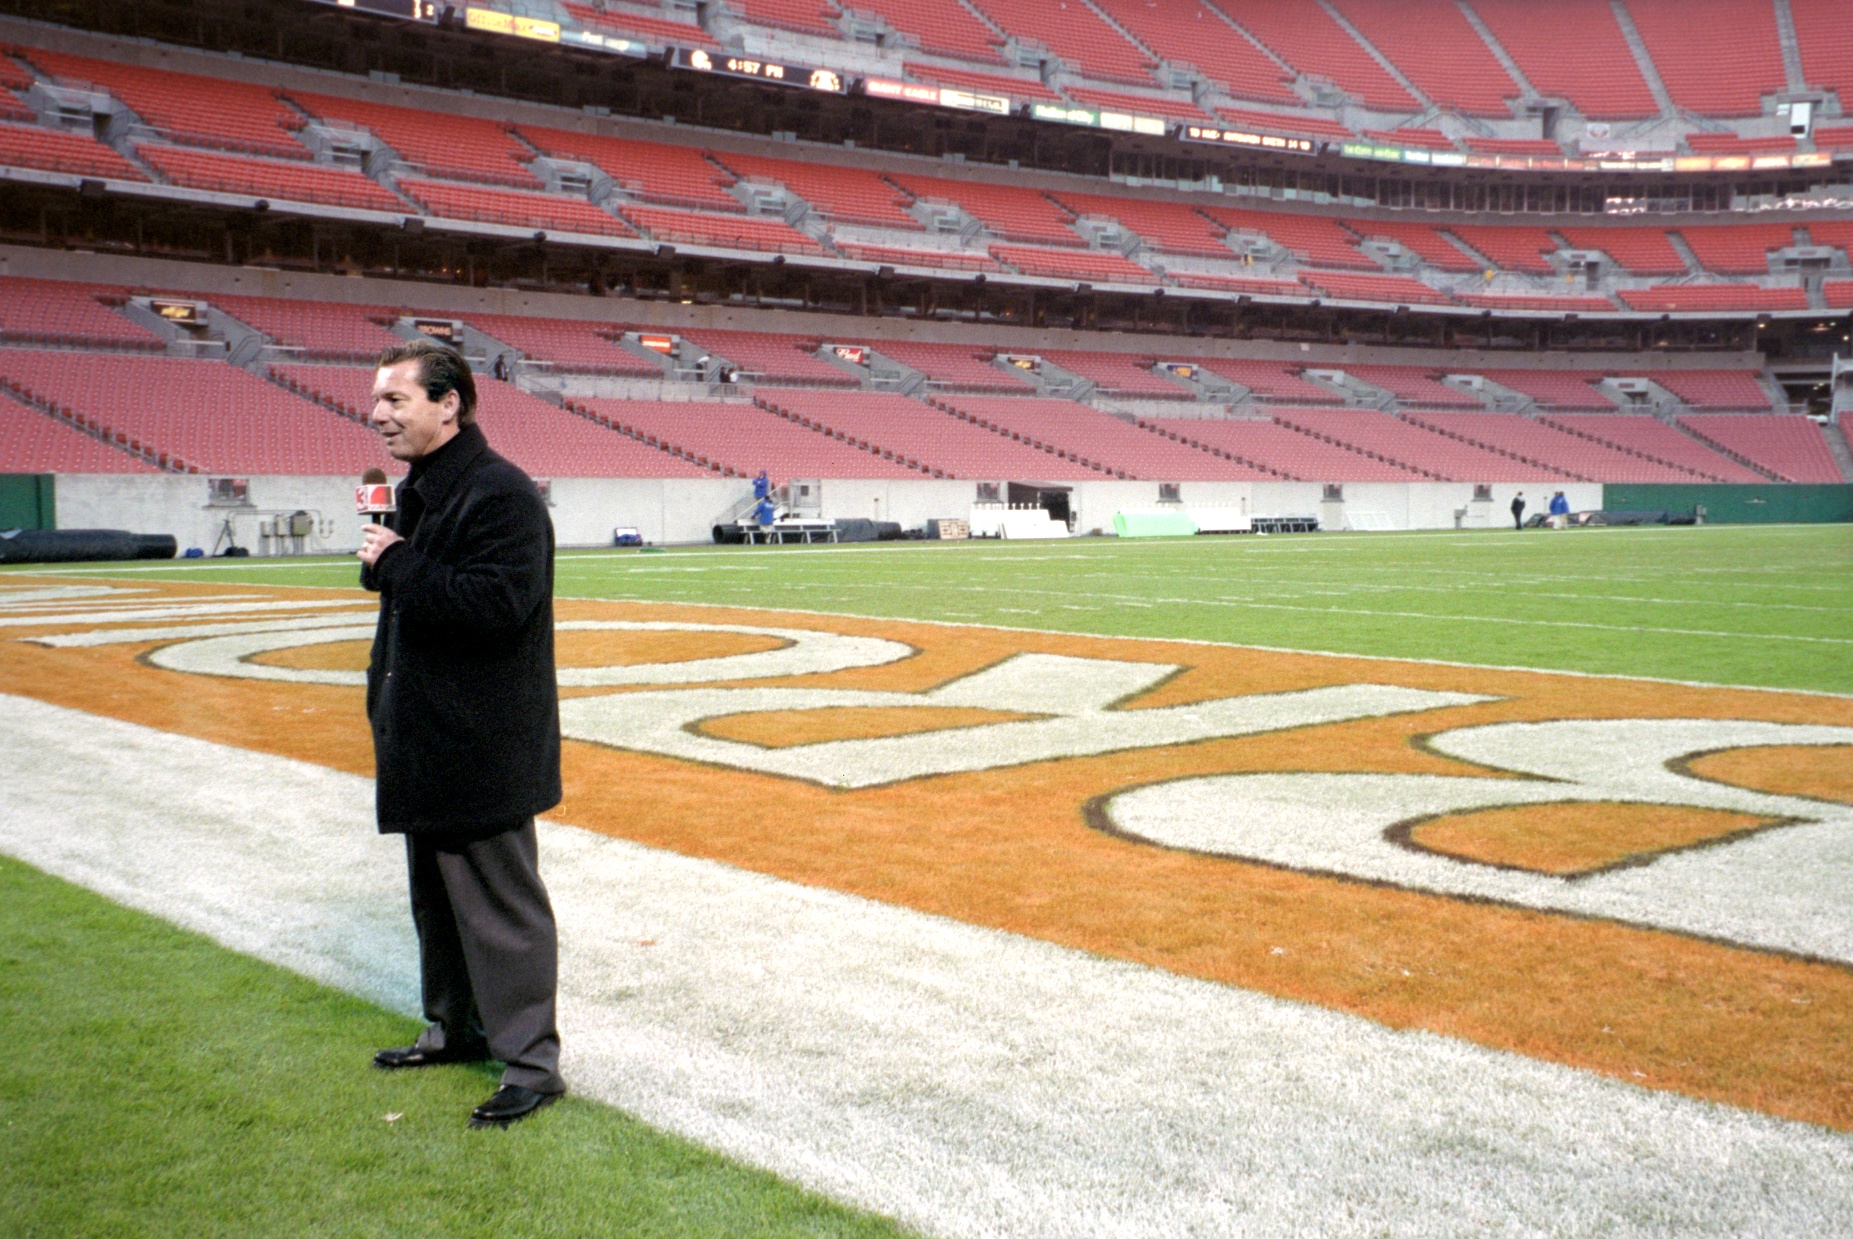 Jim Donovan of WKYC-TV, Cleveland Browns radio, reveals cancer relapse